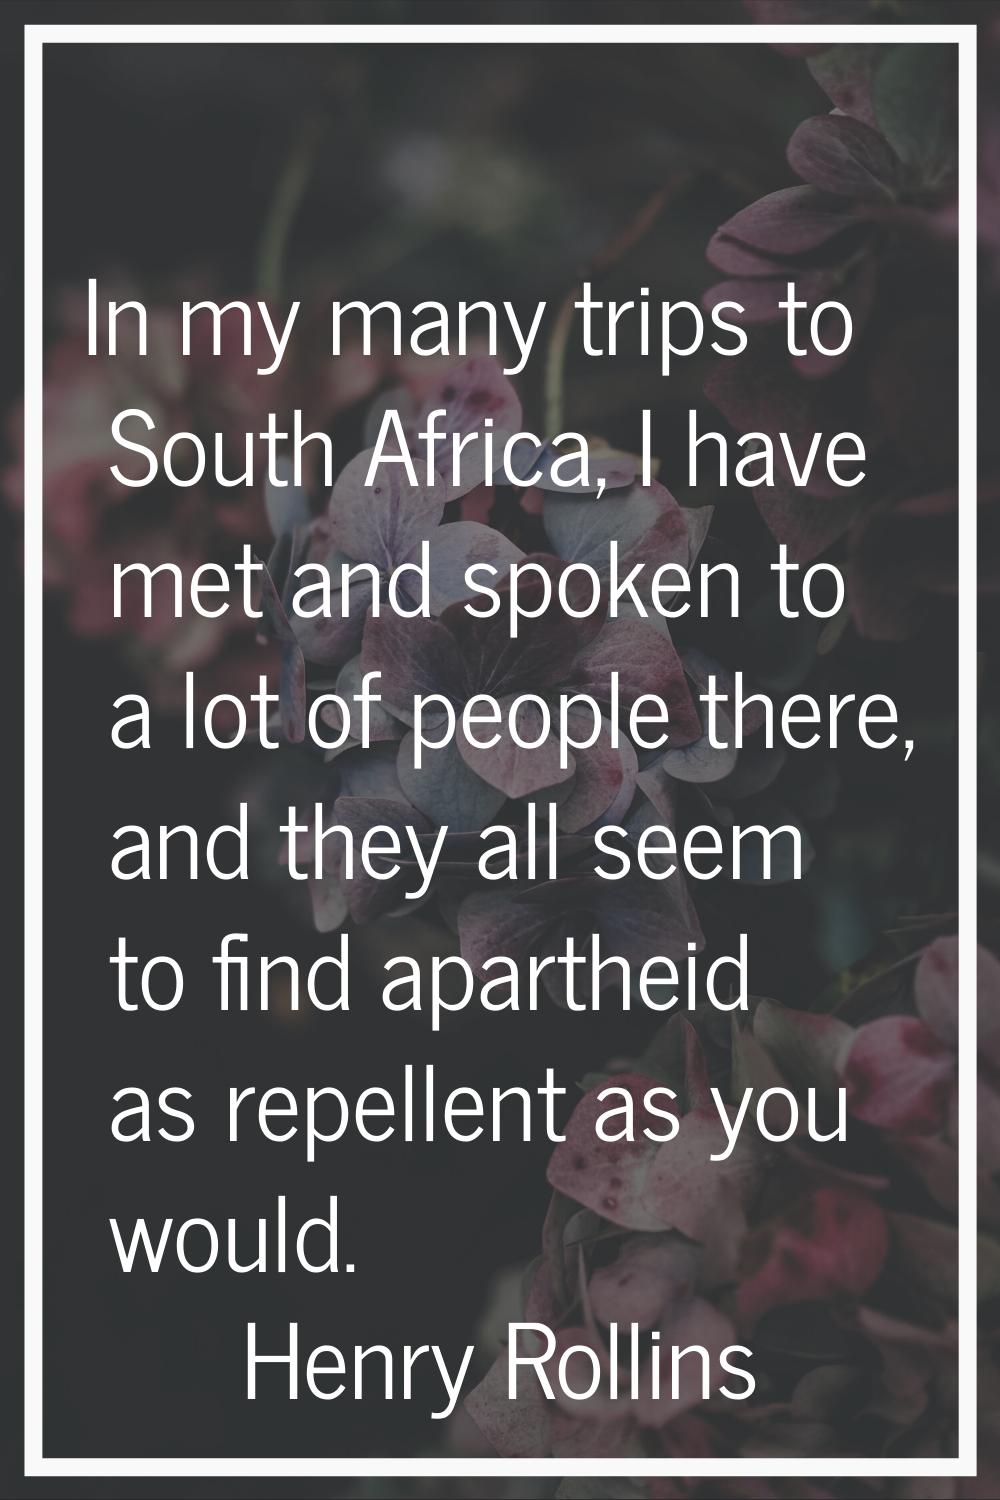 In my many trips to South Africa, I have met and spoken to a lot of people there, and they all seem